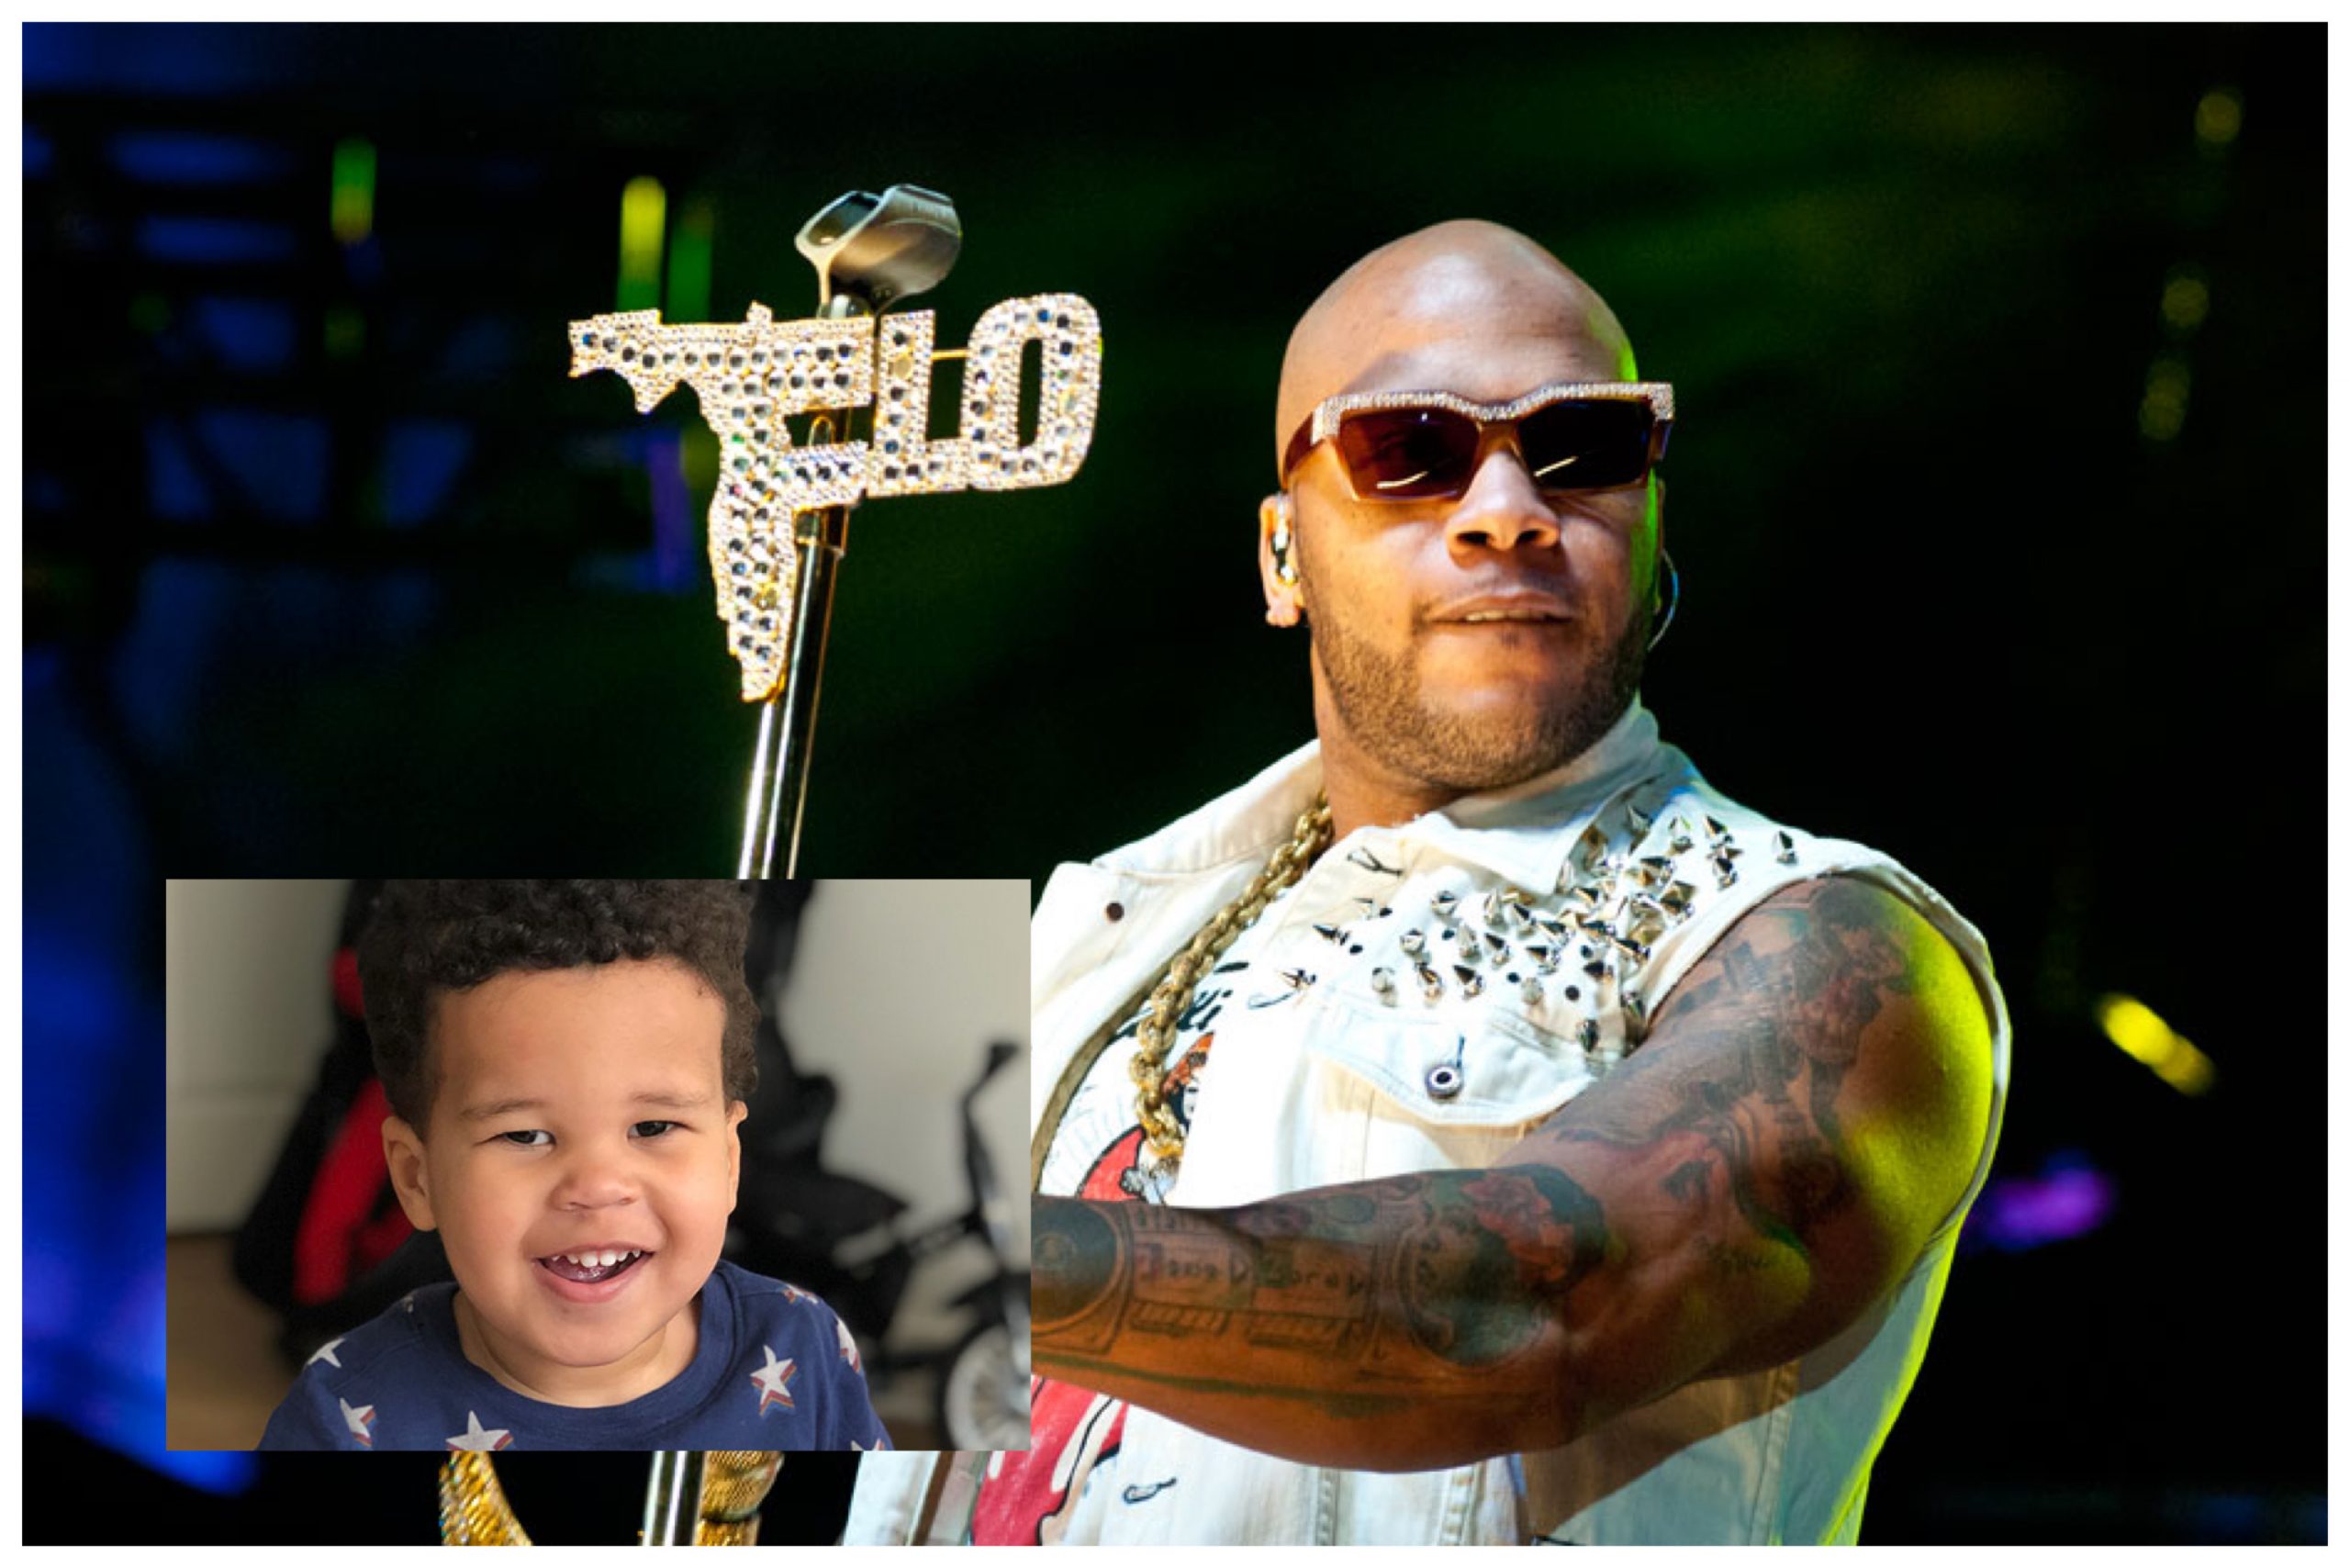 Rapper, Flo Rida, 6-Year-Old Son In ICU After Falling From A Five-Story Apartment Building